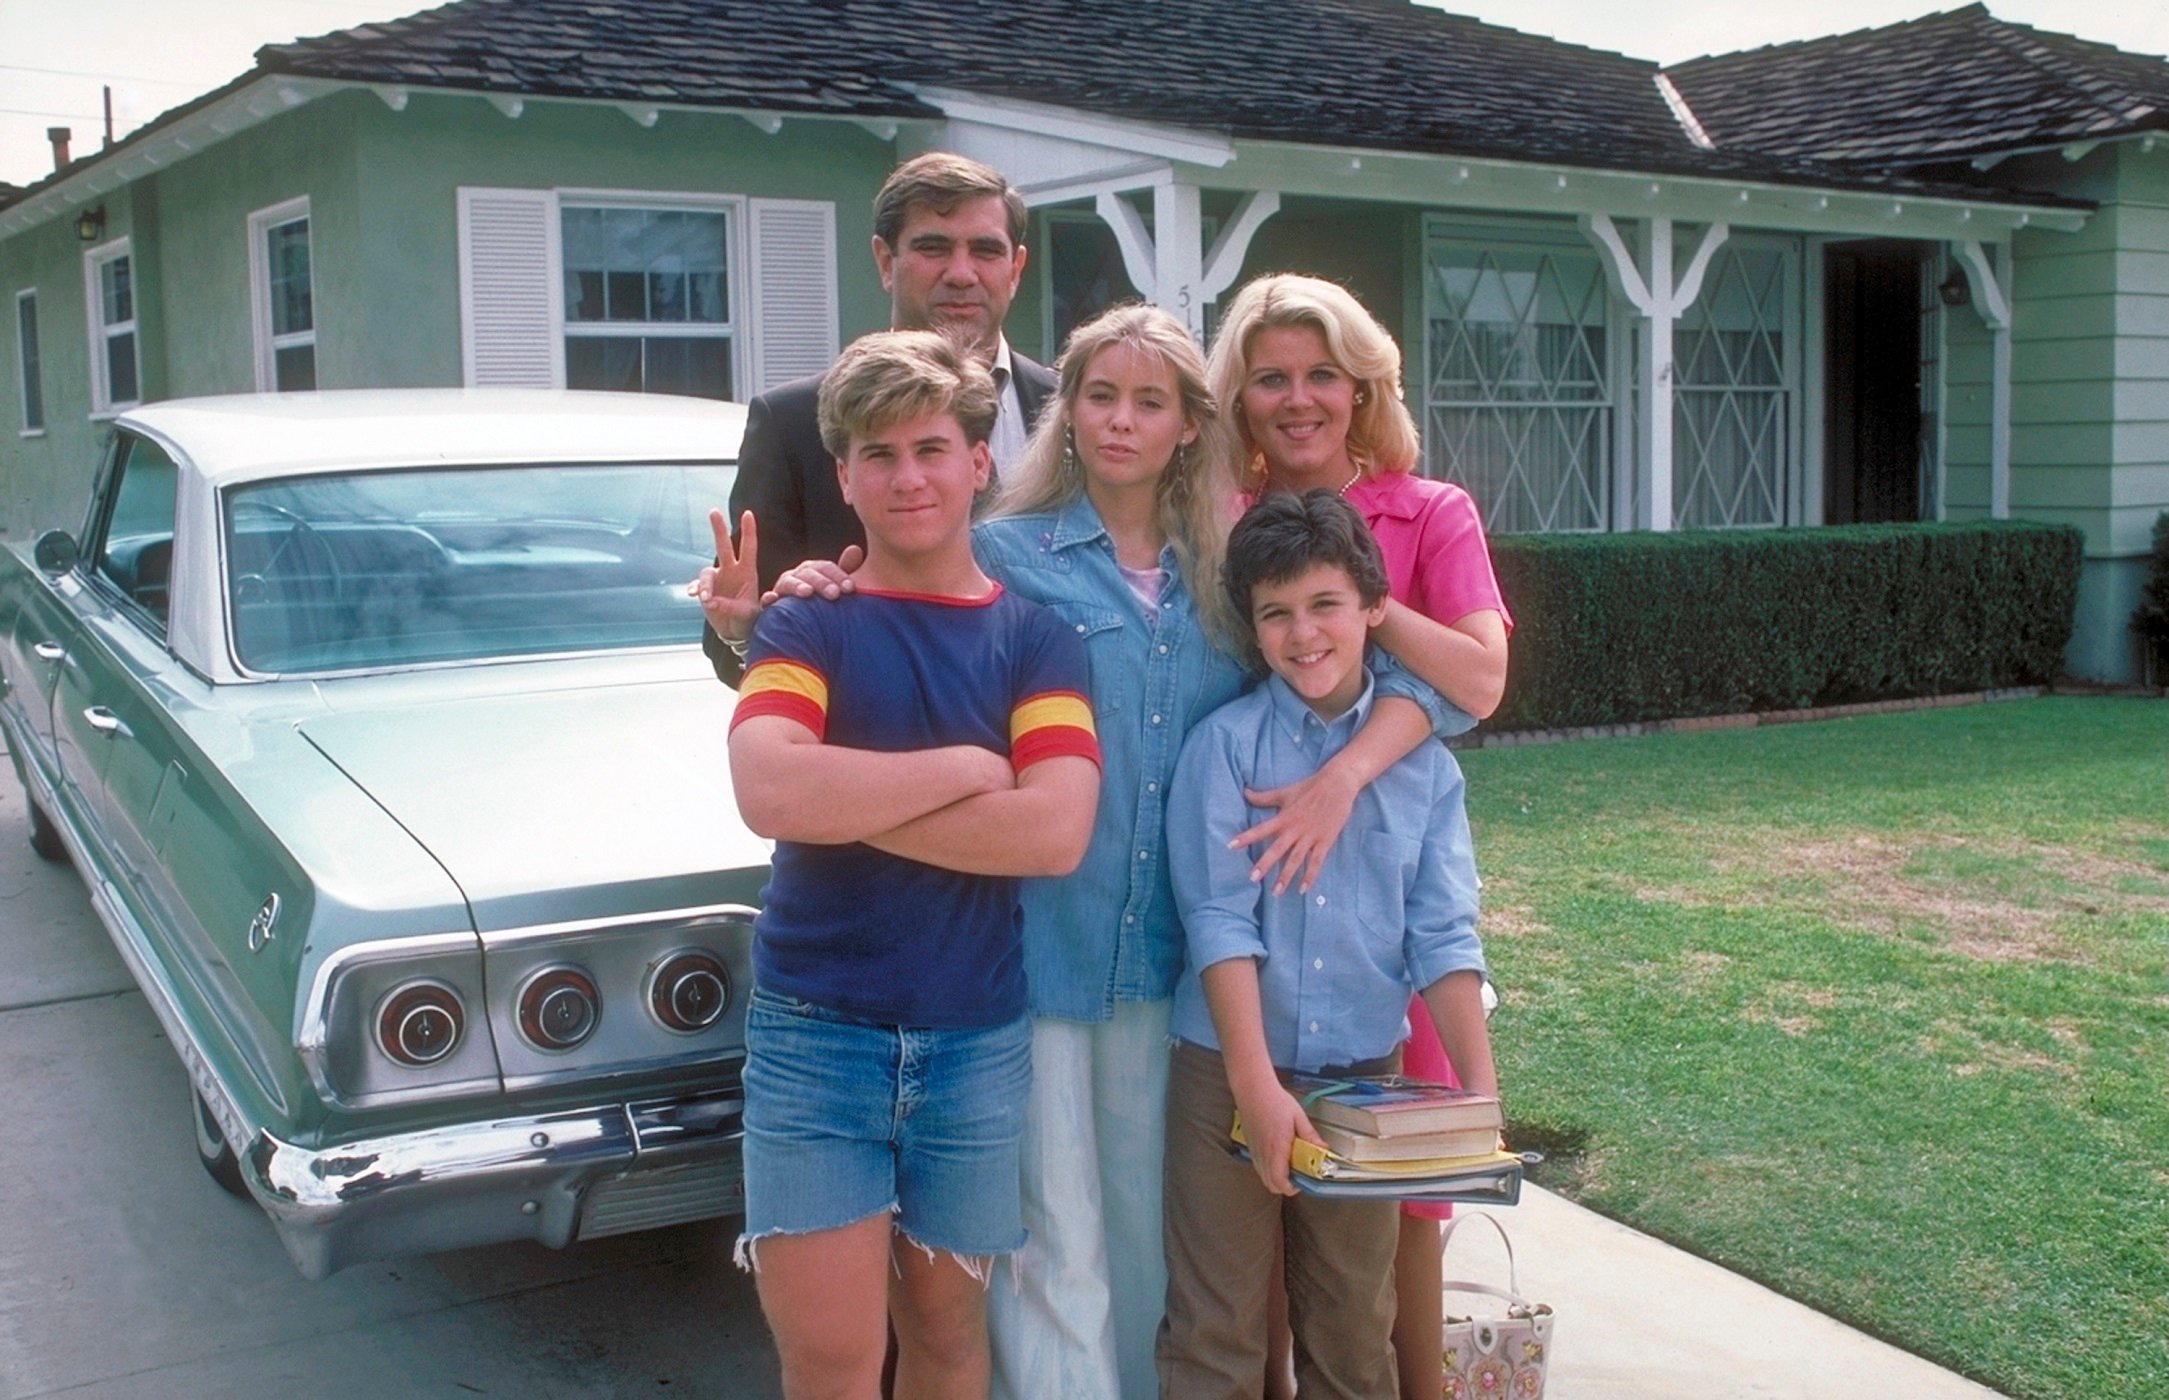 The Arnold family from ''The Wonder Years'